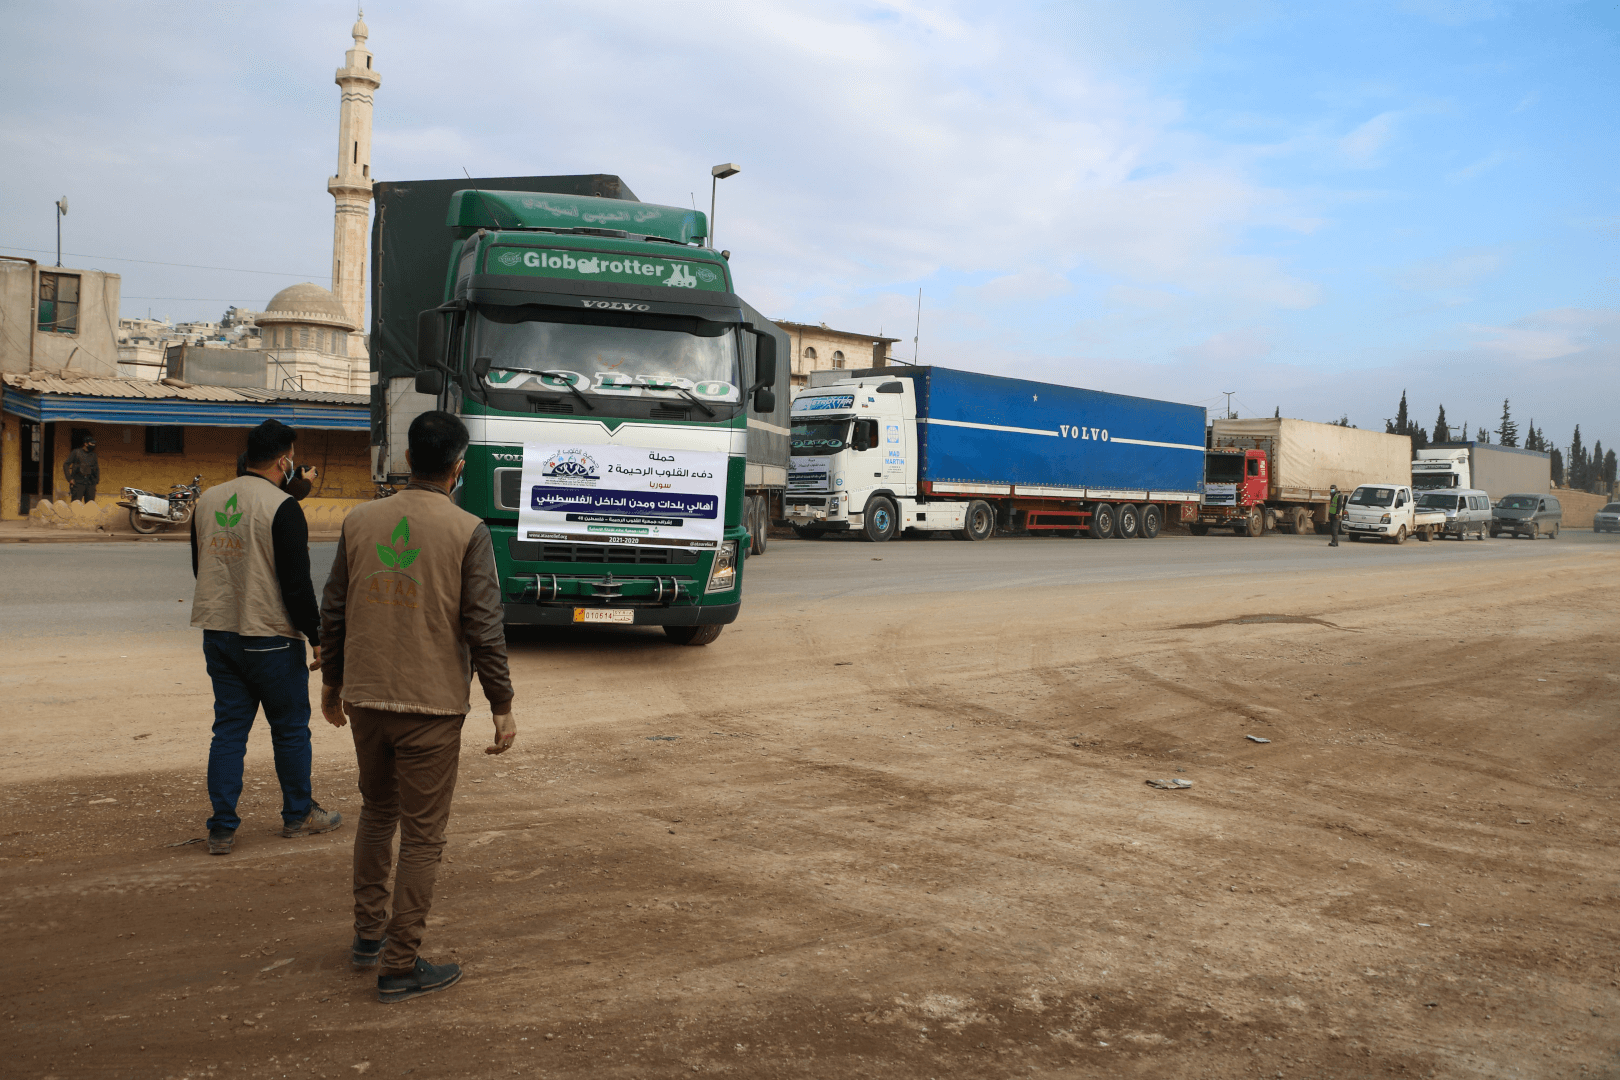 Ataa Association runs relief convoys provided by the Palestinian people